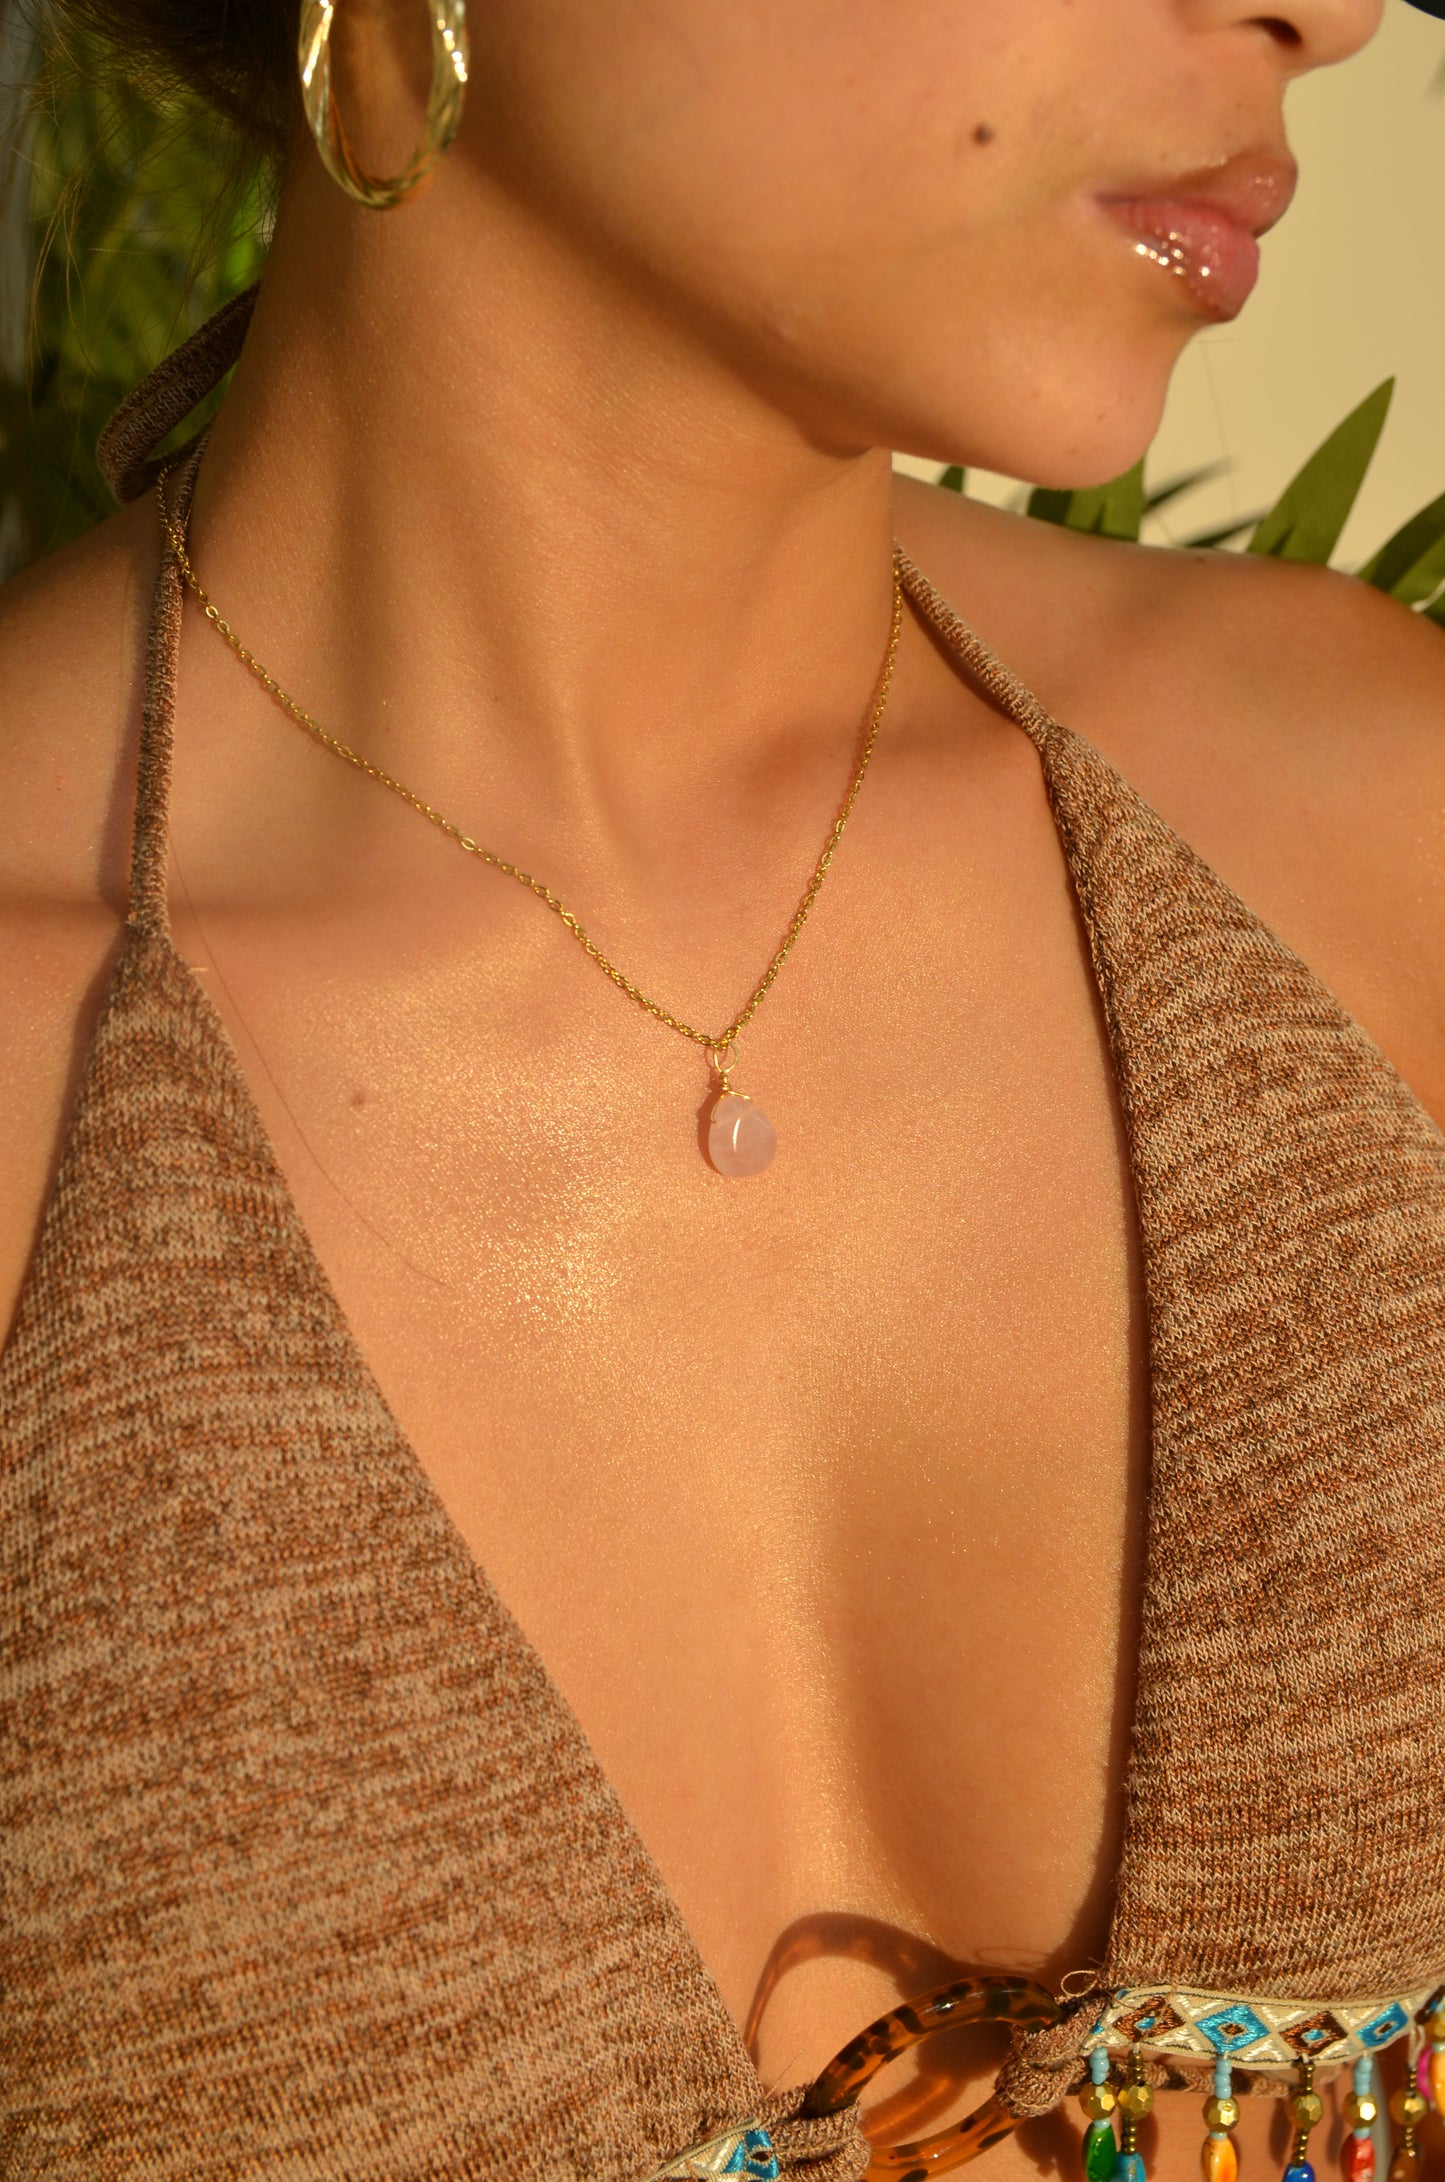 DAINTY ENERGY HEALING CRYSTAL NECKLACE